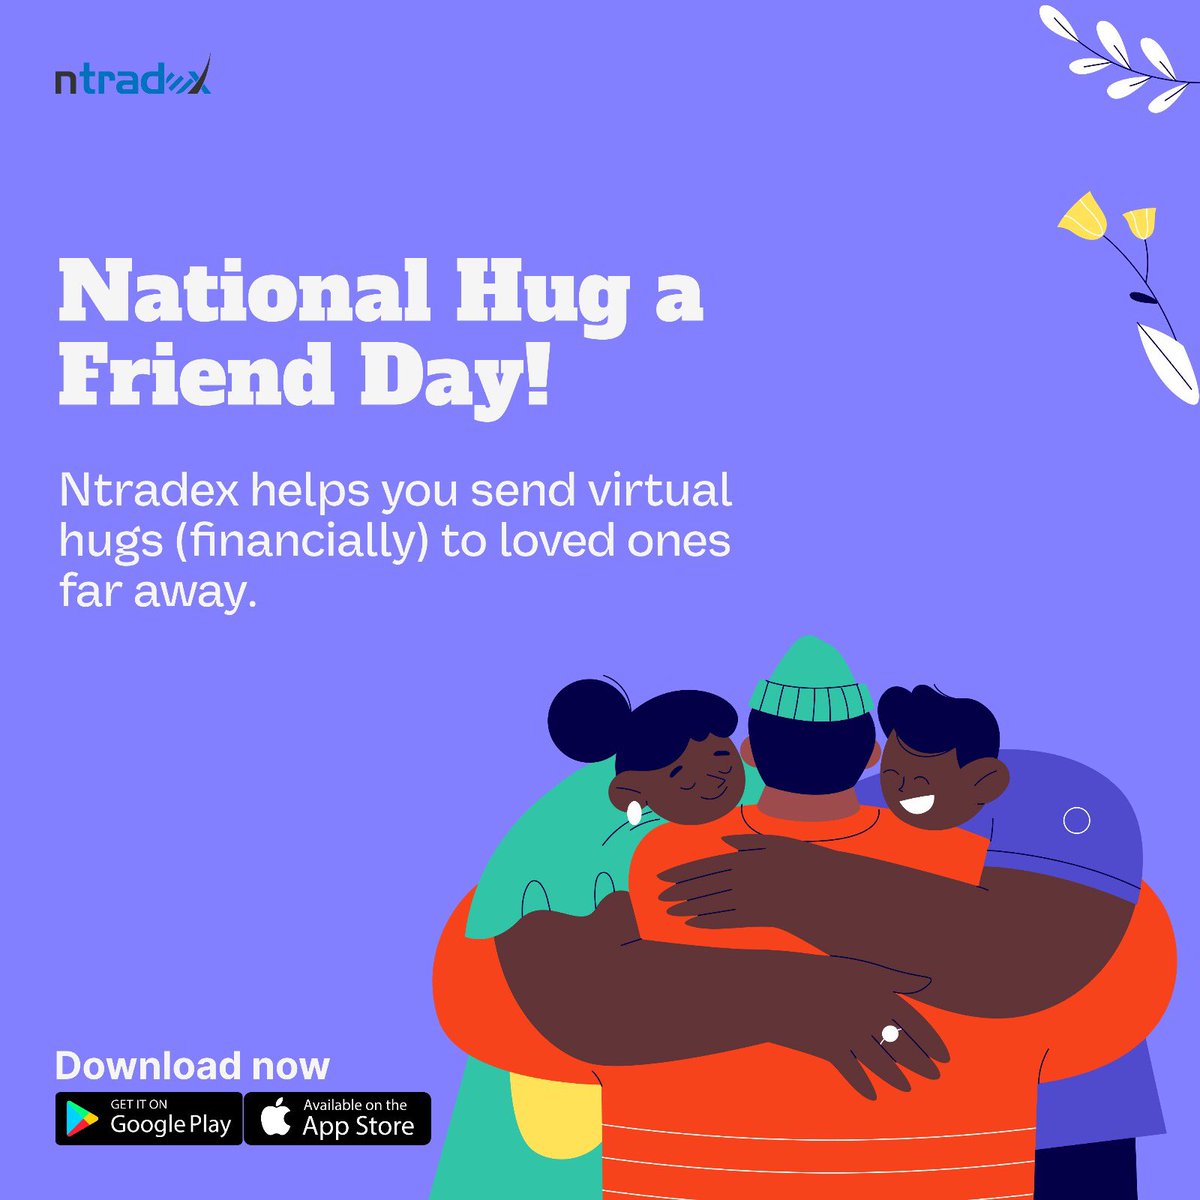 Let's embrace the spirit of togetherness with Ntradex 🫂💫

The perfect way is to send virtual hugs (financially) to your loved ones, no matter how far they may be! 🤗

Download now on Google Play or the App Store for a heartfelt connection at your fingertips. 

Spread the love